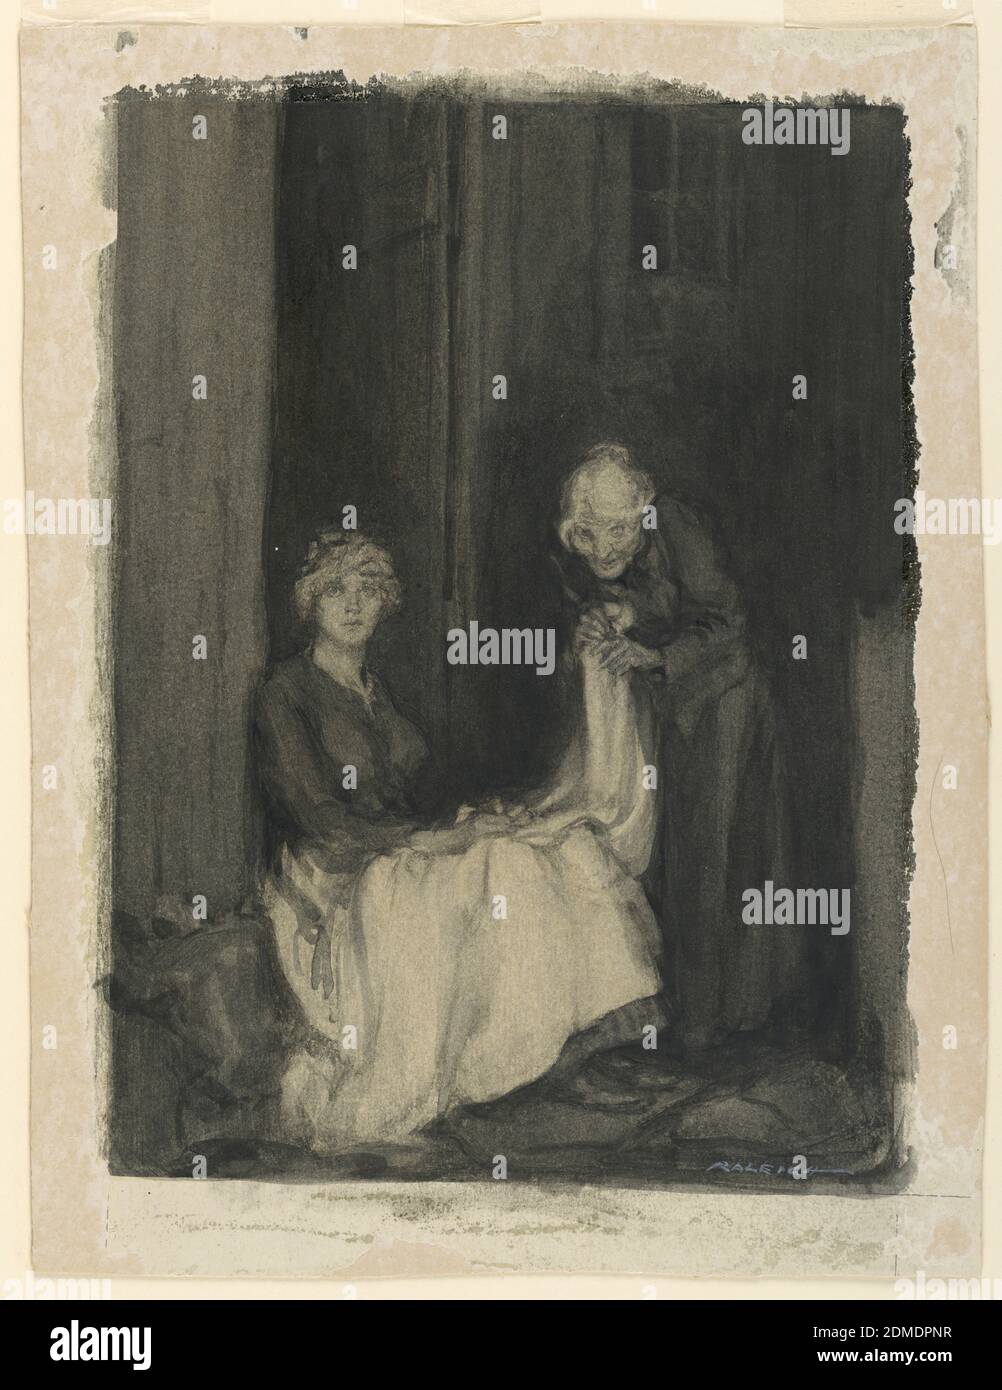 White My Flax, Red My Ring, Gold the Heart of My Betrothed, Henry Patrick Raleigh, American, 1880–1944, Charcoal, brush and grey, black and white watercolor on illustration board, A young woman seated in a doorway is shown with a sheet in her lap. Beside her an old woman stands and clutches at the hem of the sheet., USA, 1914, figures, Drawing Stock Photo